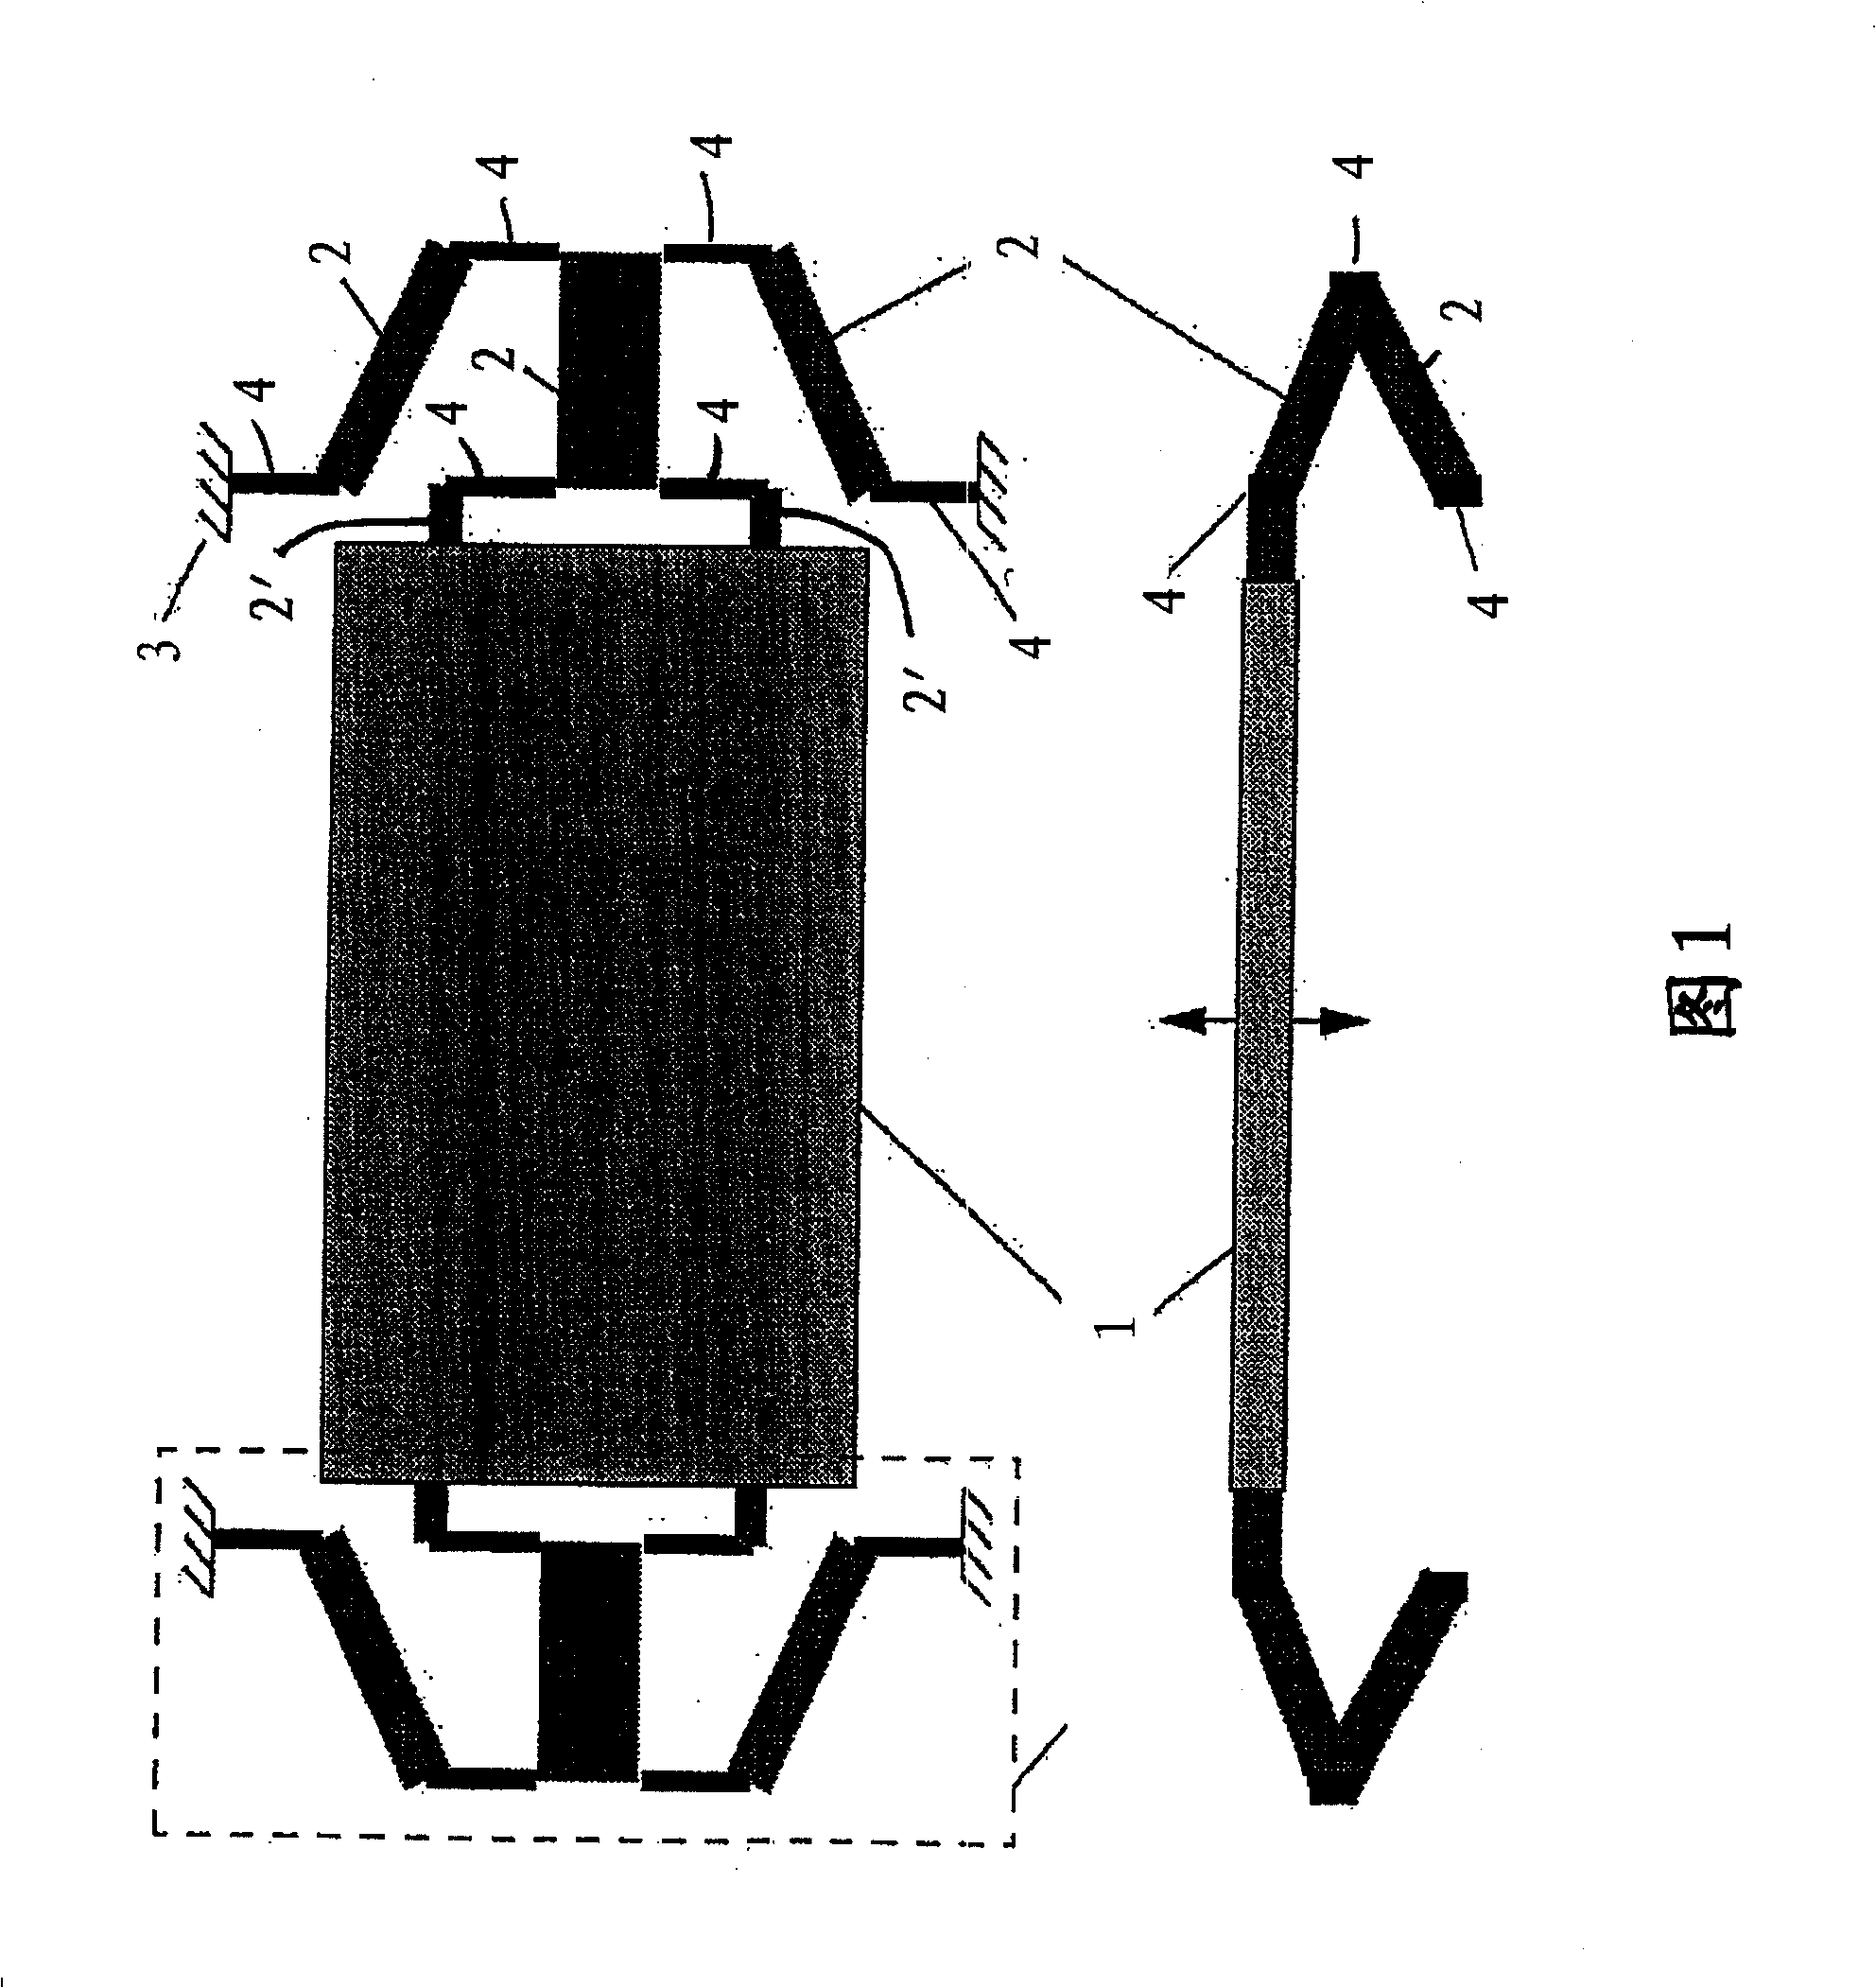 Micro-mechanical element capable of derivation